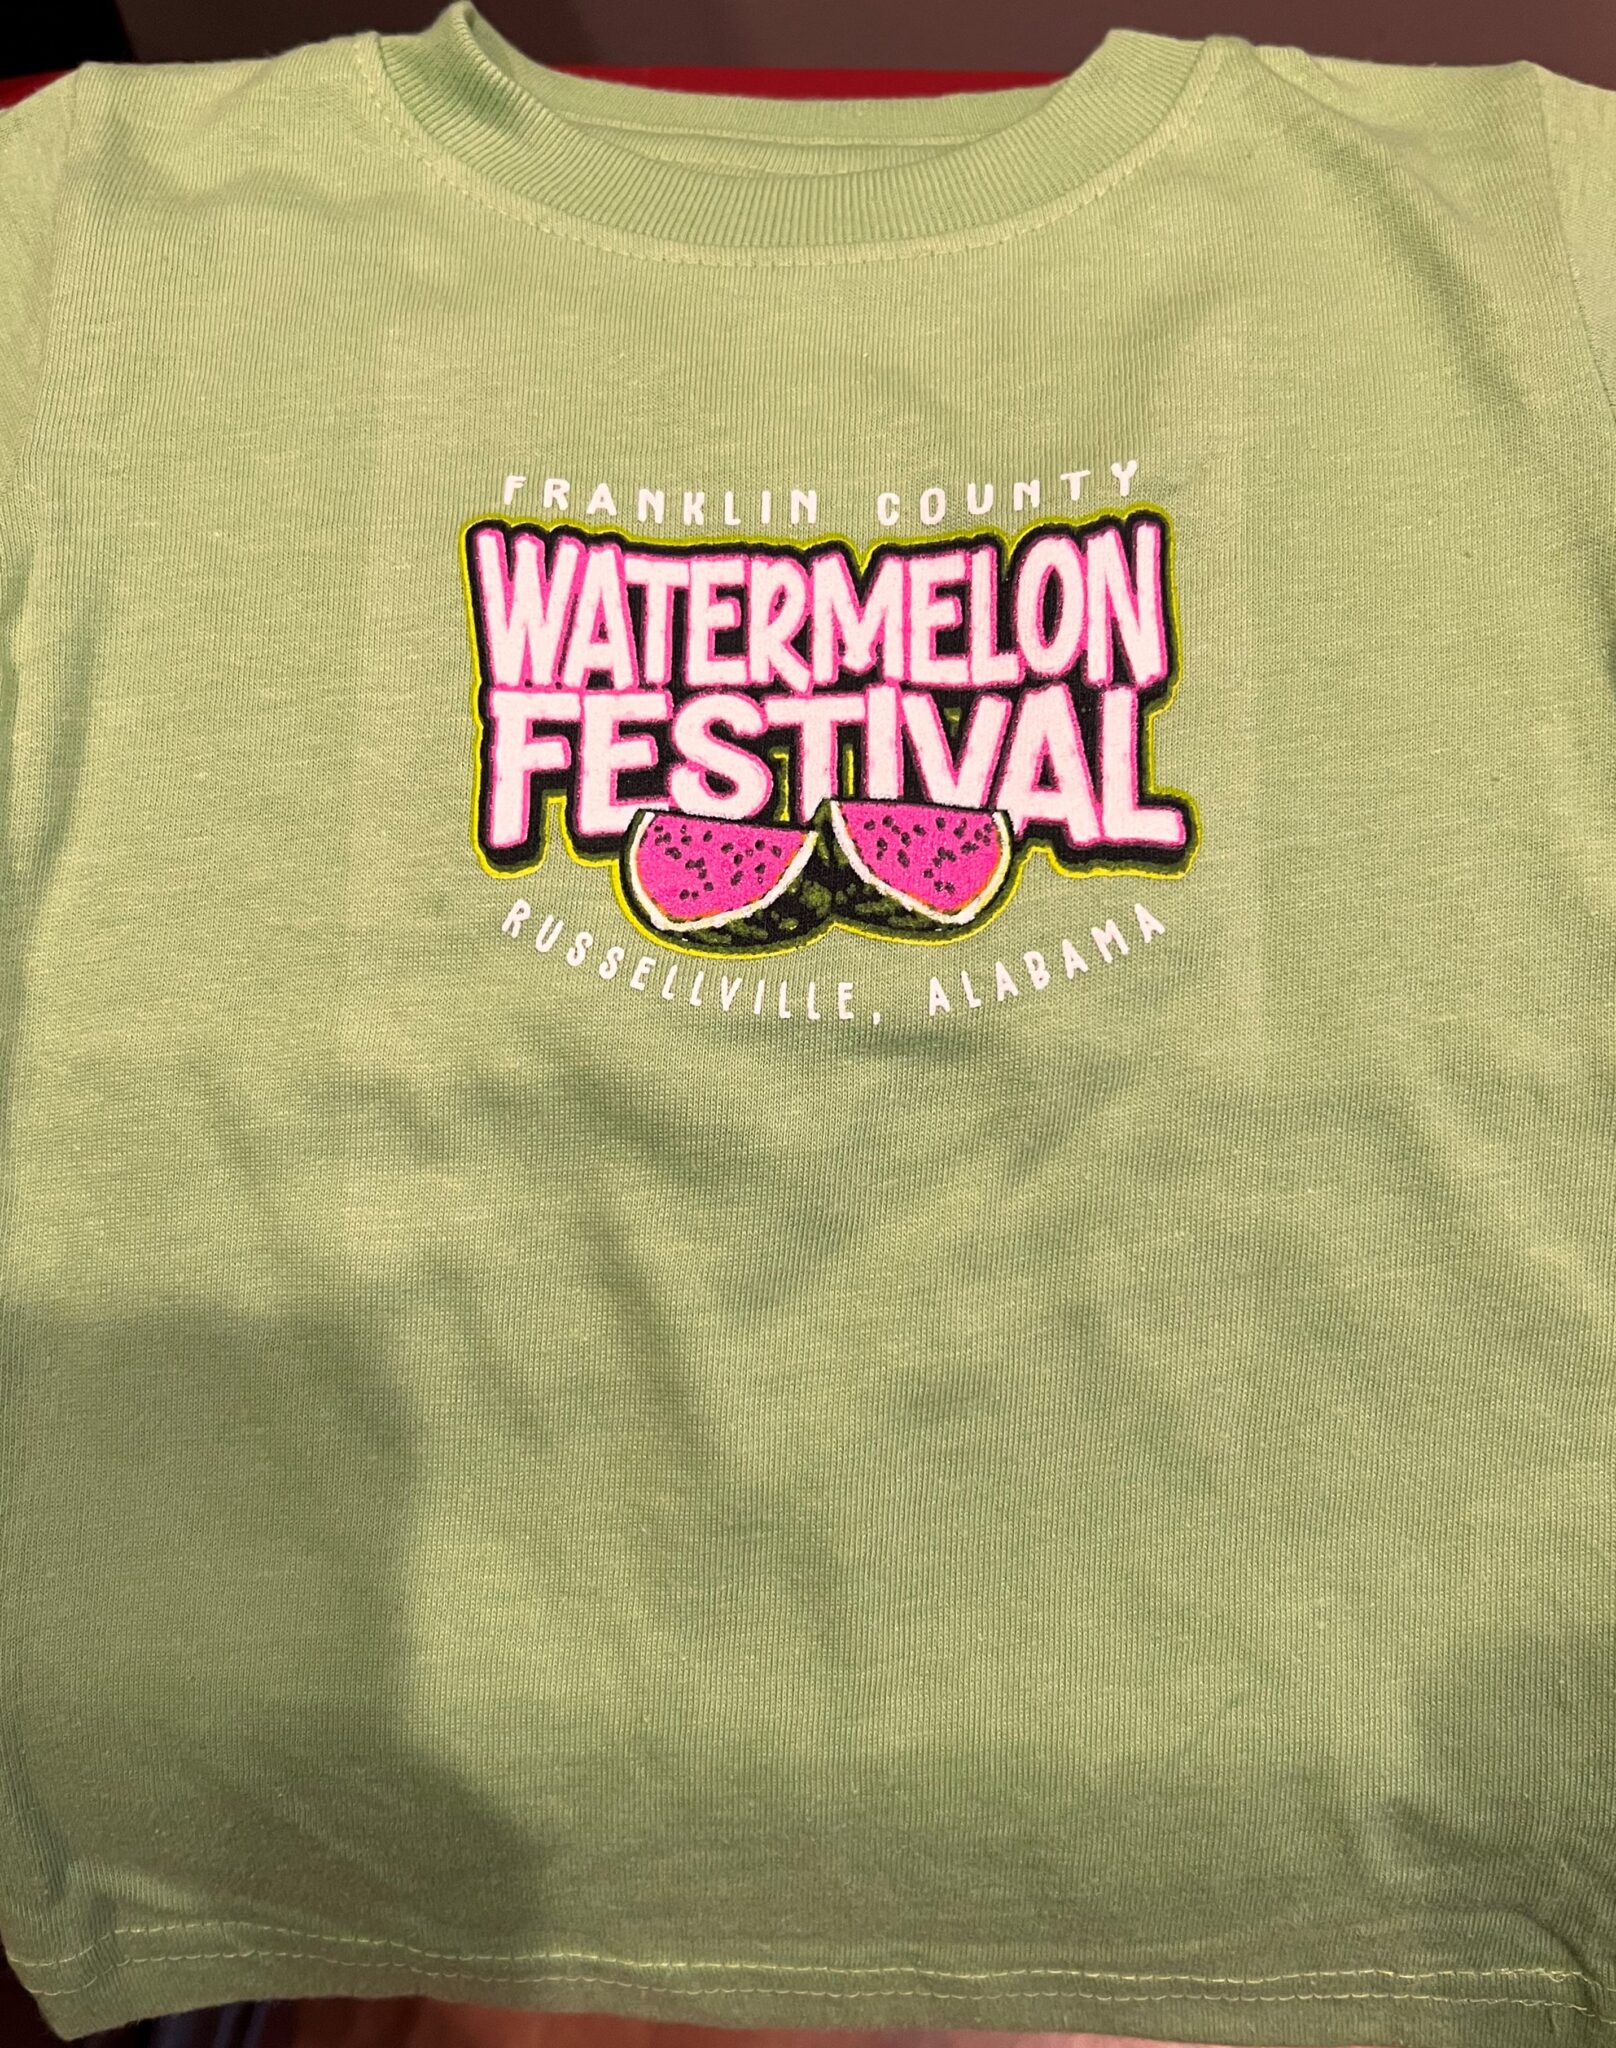 WATERMELON FESTIVAL | Franklin County || Chamber of Commerce